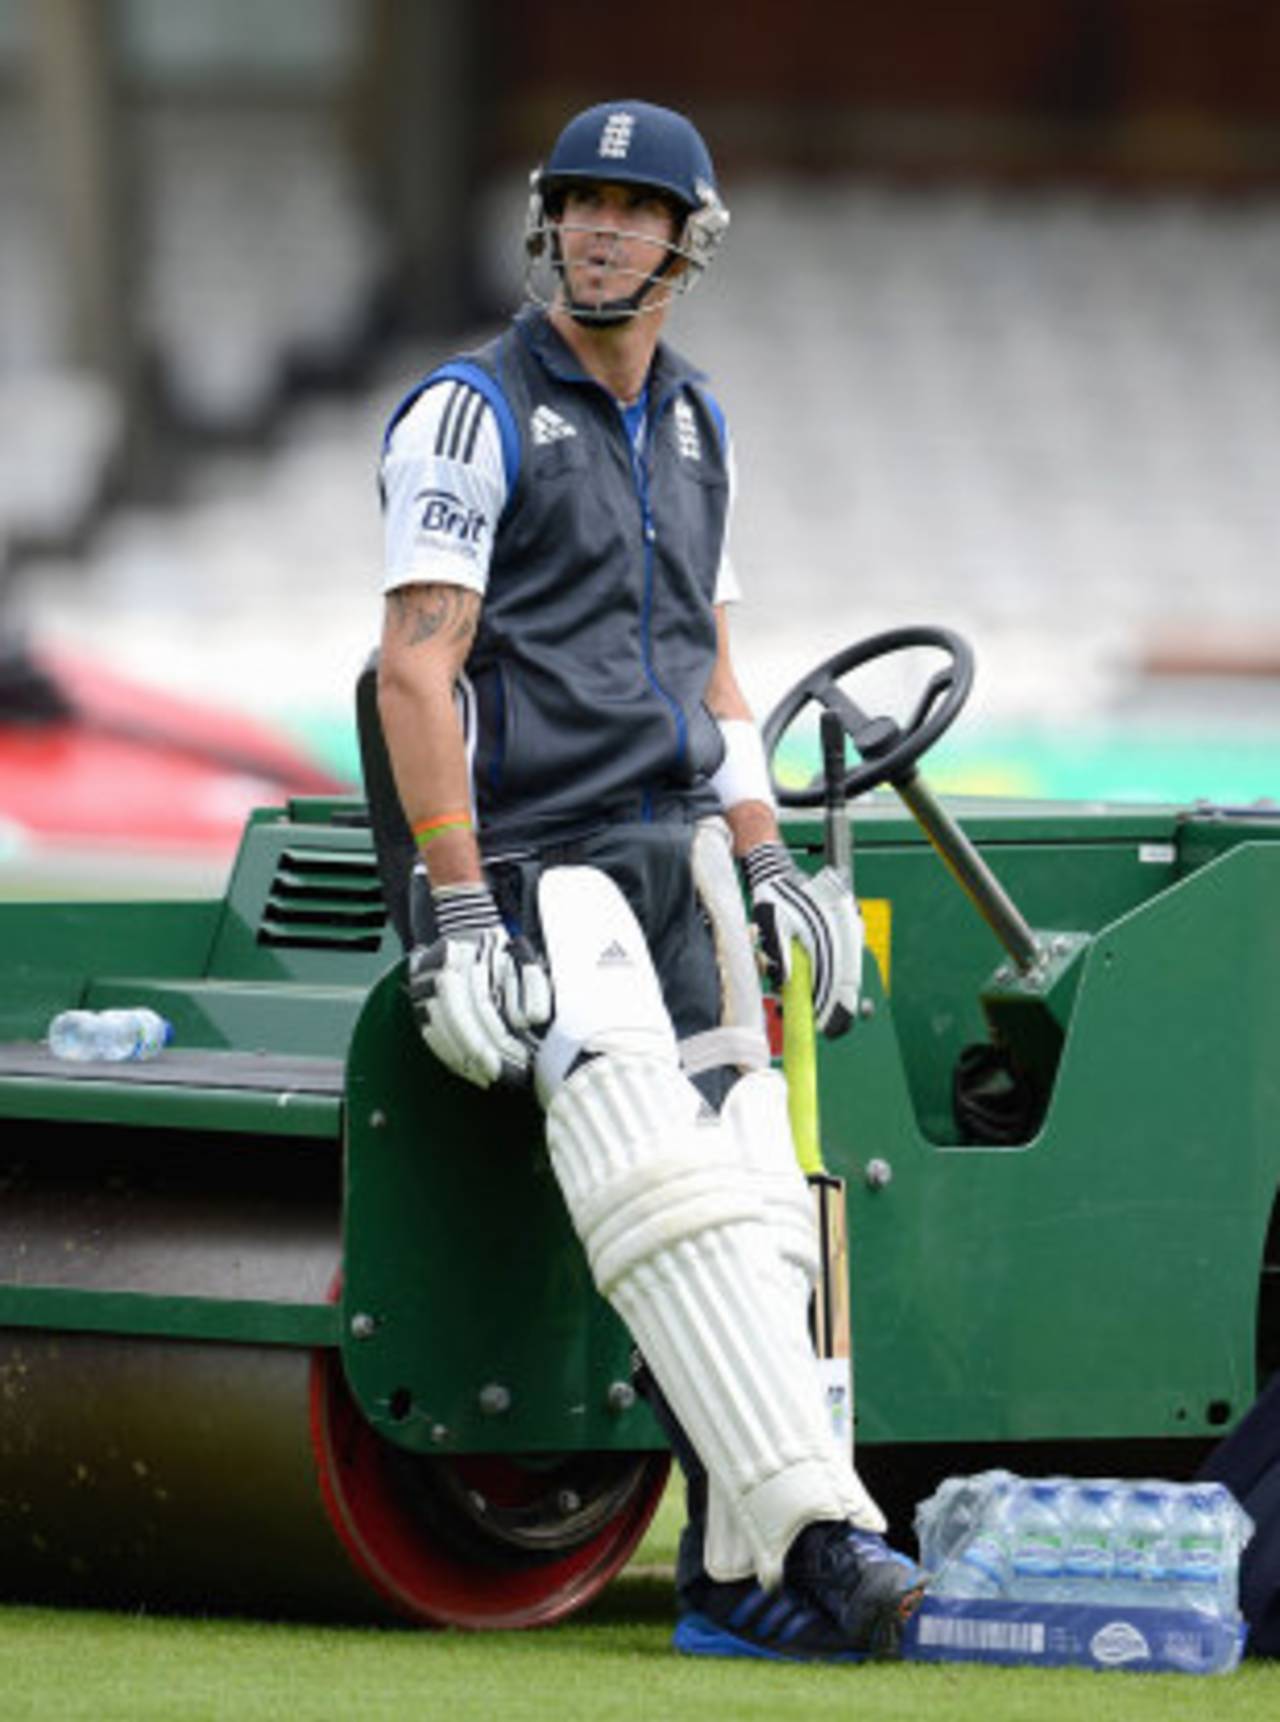 Kevin Pietersen ponders life during a tricky week, The Oval, July 17, 2012